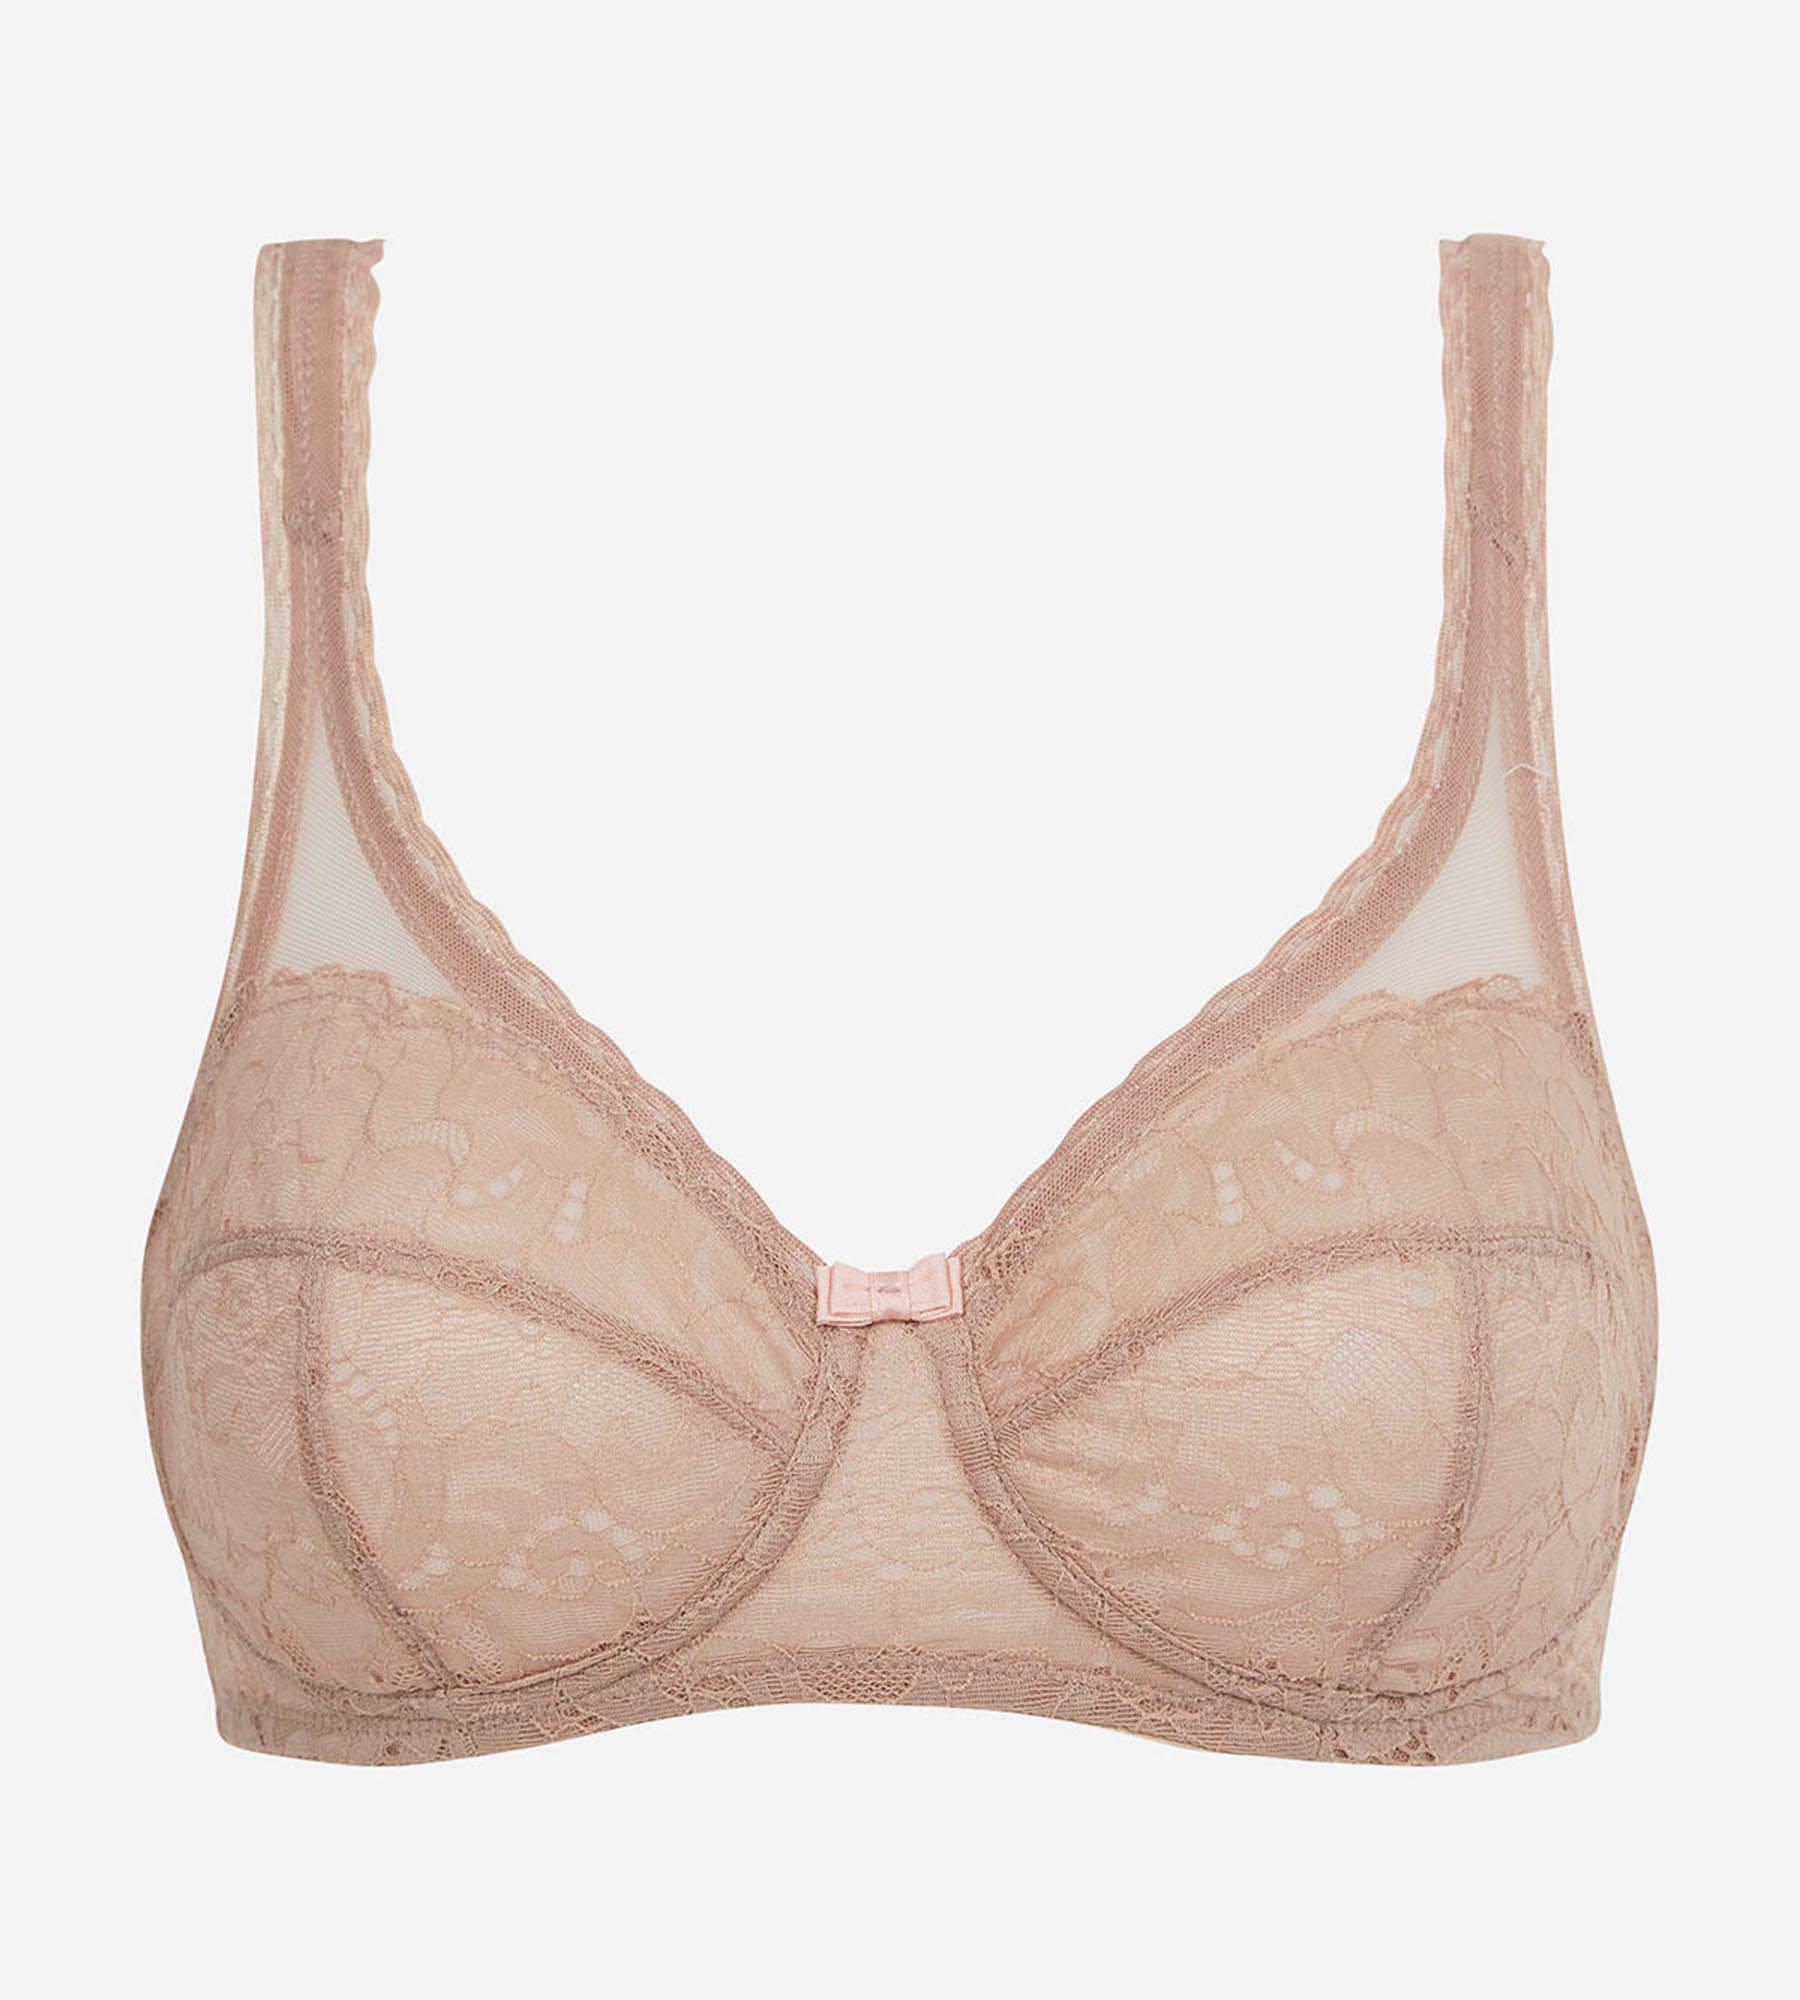 Classic bra, lace inlays, B to L-cup